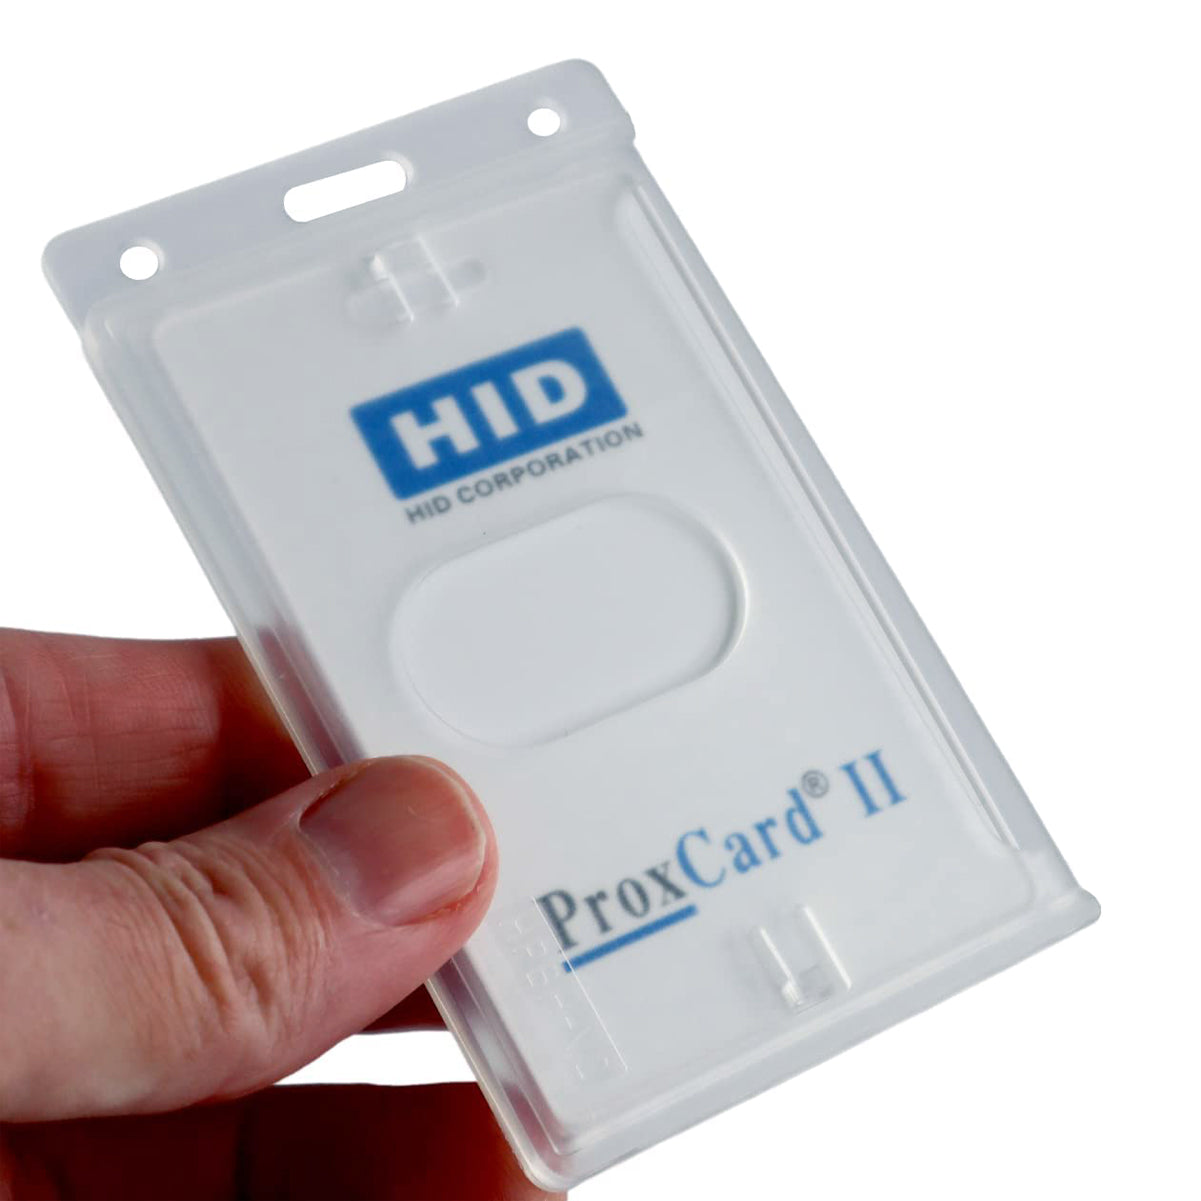 Vertical 70 - 90 Mil ProxCard II / Thick HID Proximity Card Holder (SPID-PROX-V)